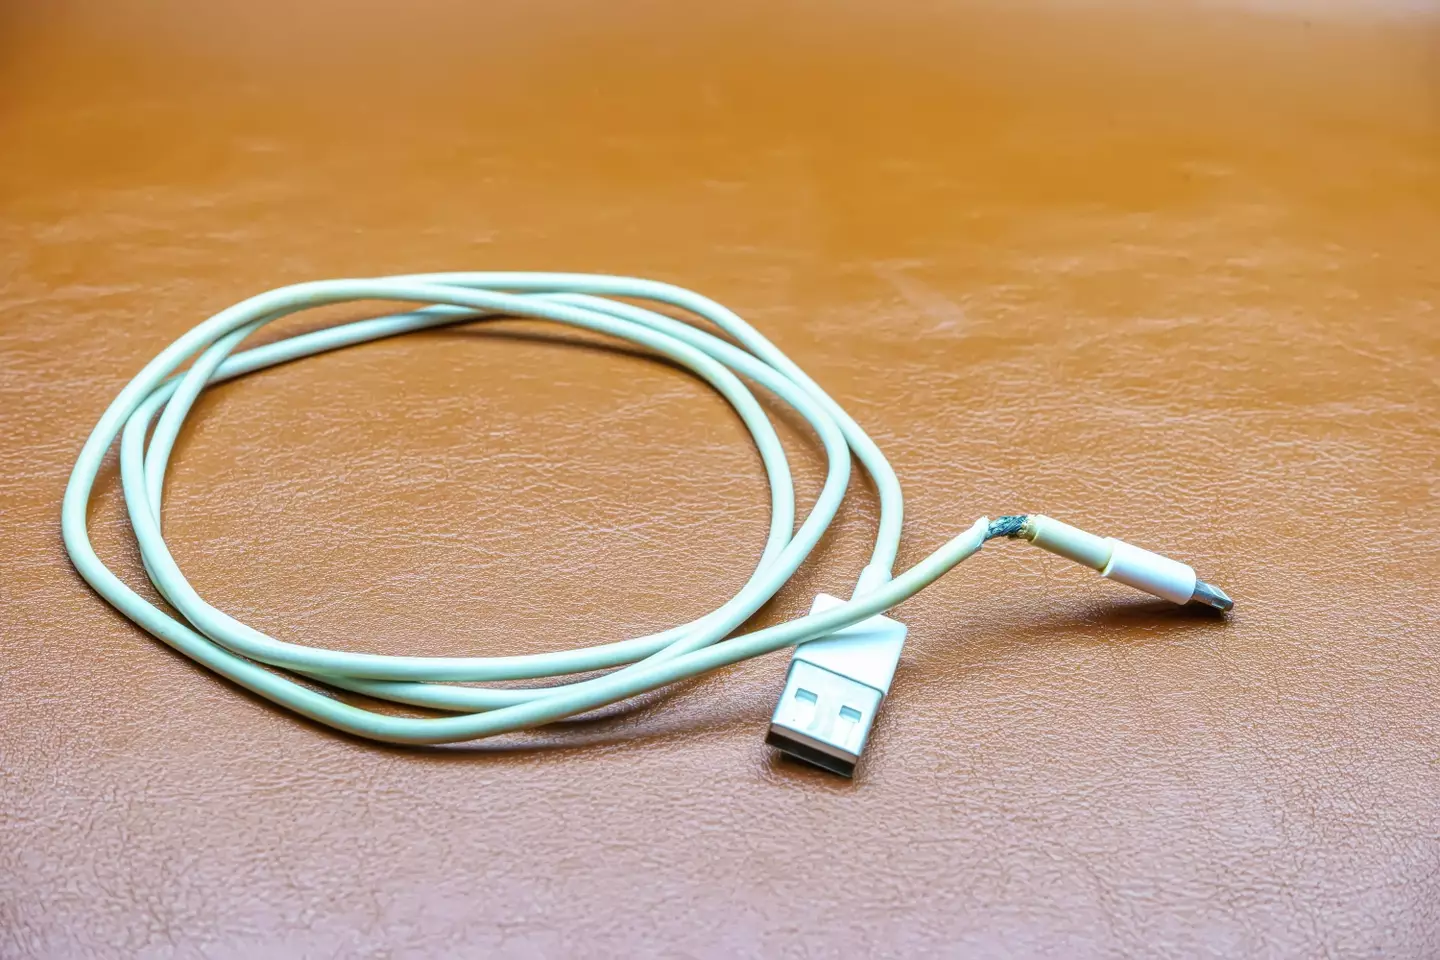 Apple has long been known for their 'short-lived' iPhone chargers.